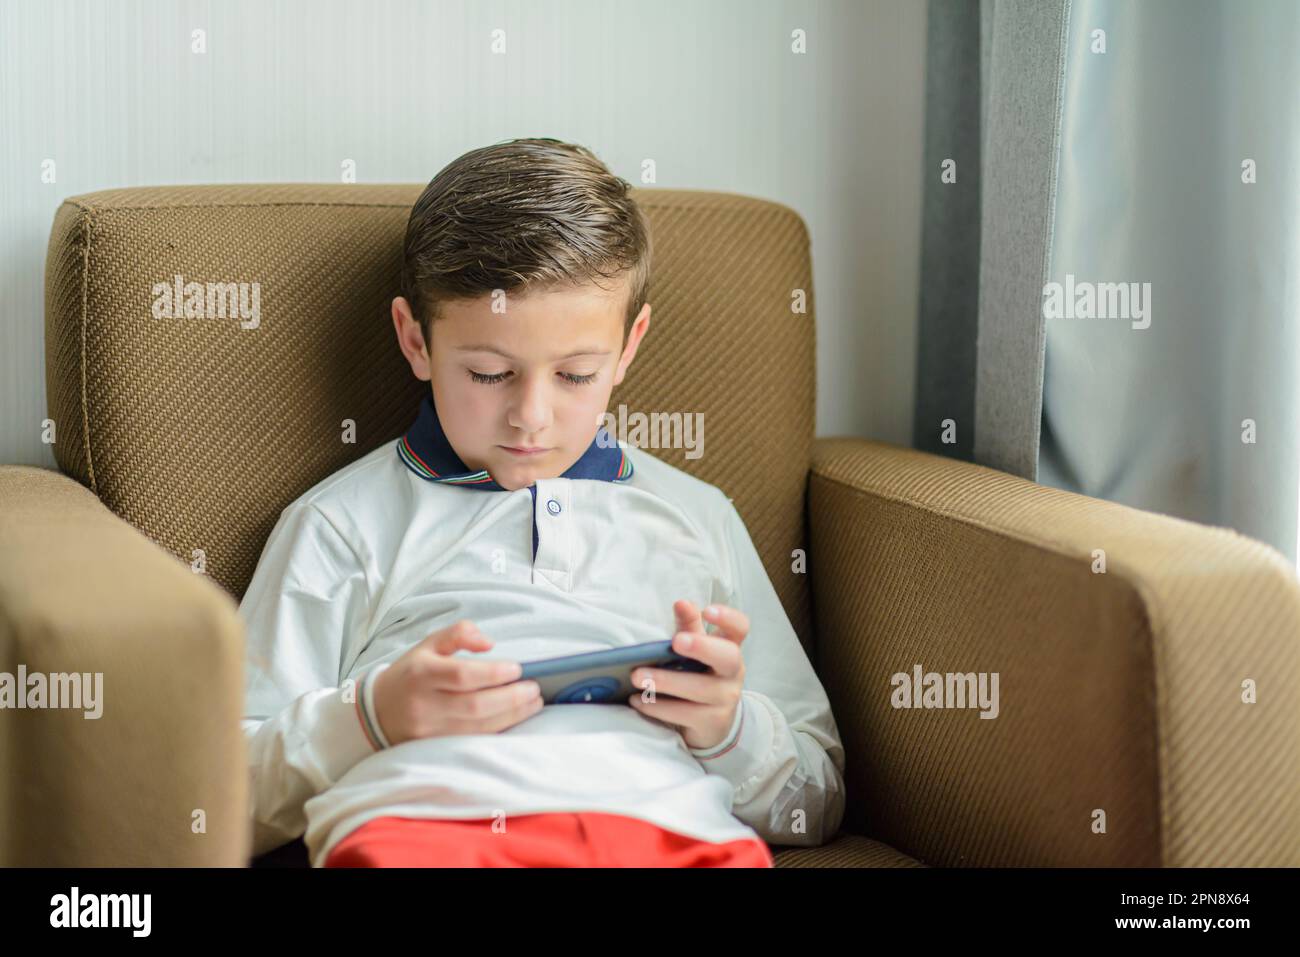 Child using smartphone while sitting on a chair. Technology use by children and its consequences, including poor posture. Stock Photo